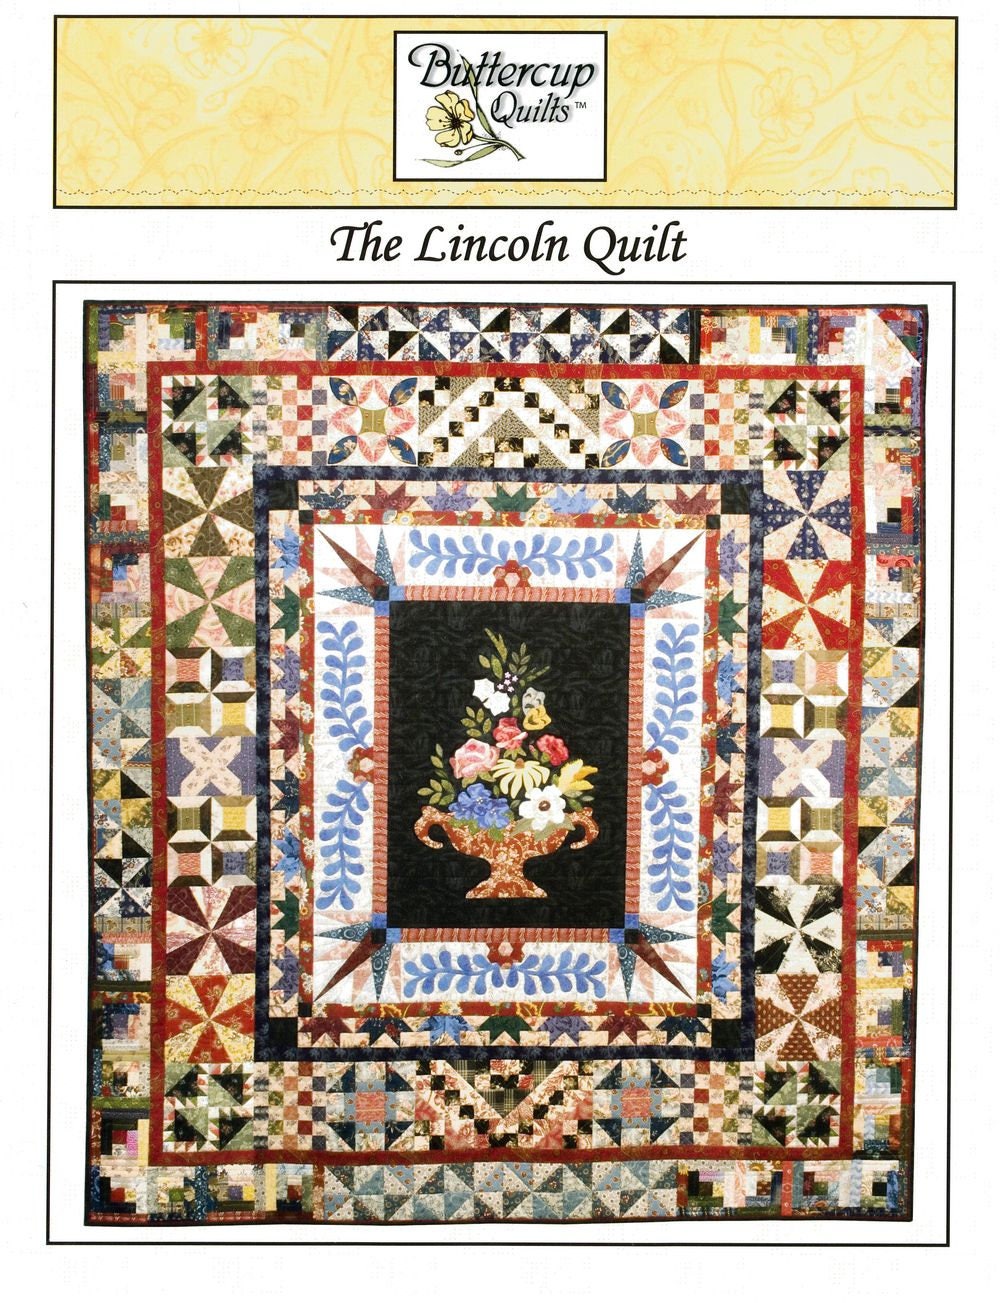 The Lincoln Quilt Pattern Book by Cody Mazuran for Buttercup Quilts